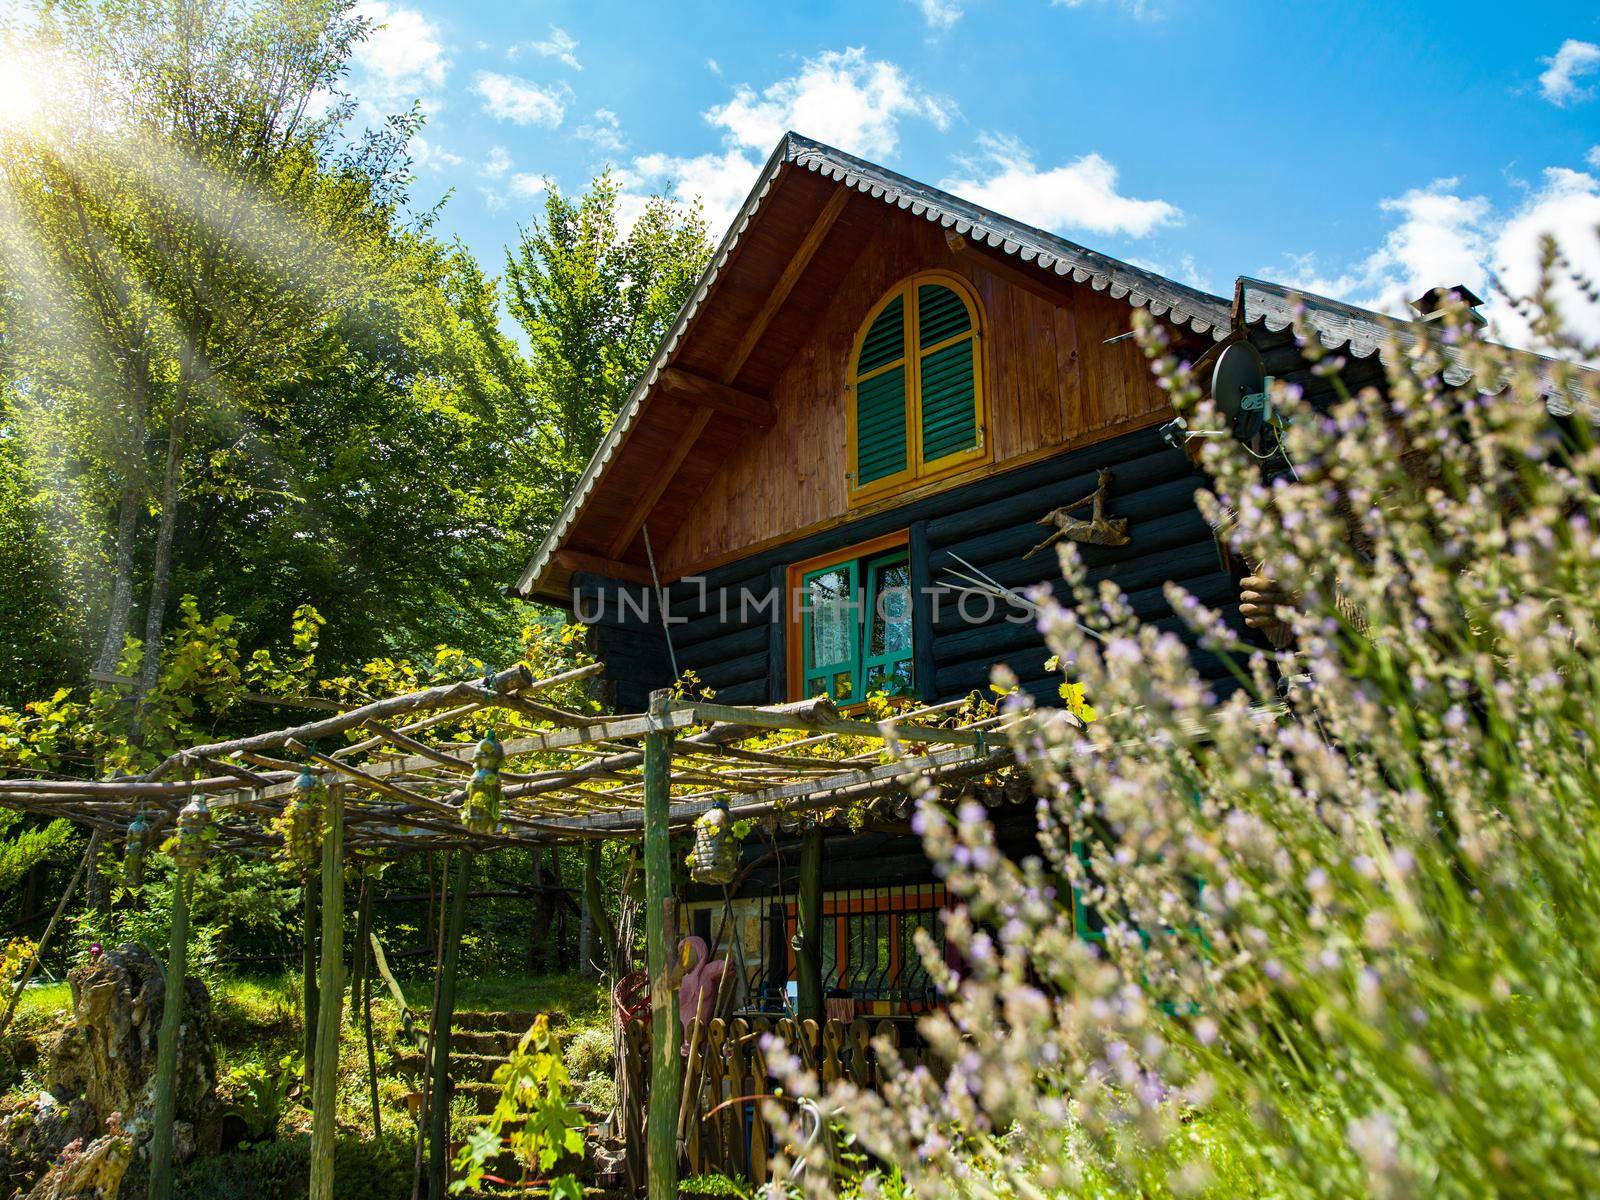 luxury family wooden  cotage house in forest with garden and colorful herbs